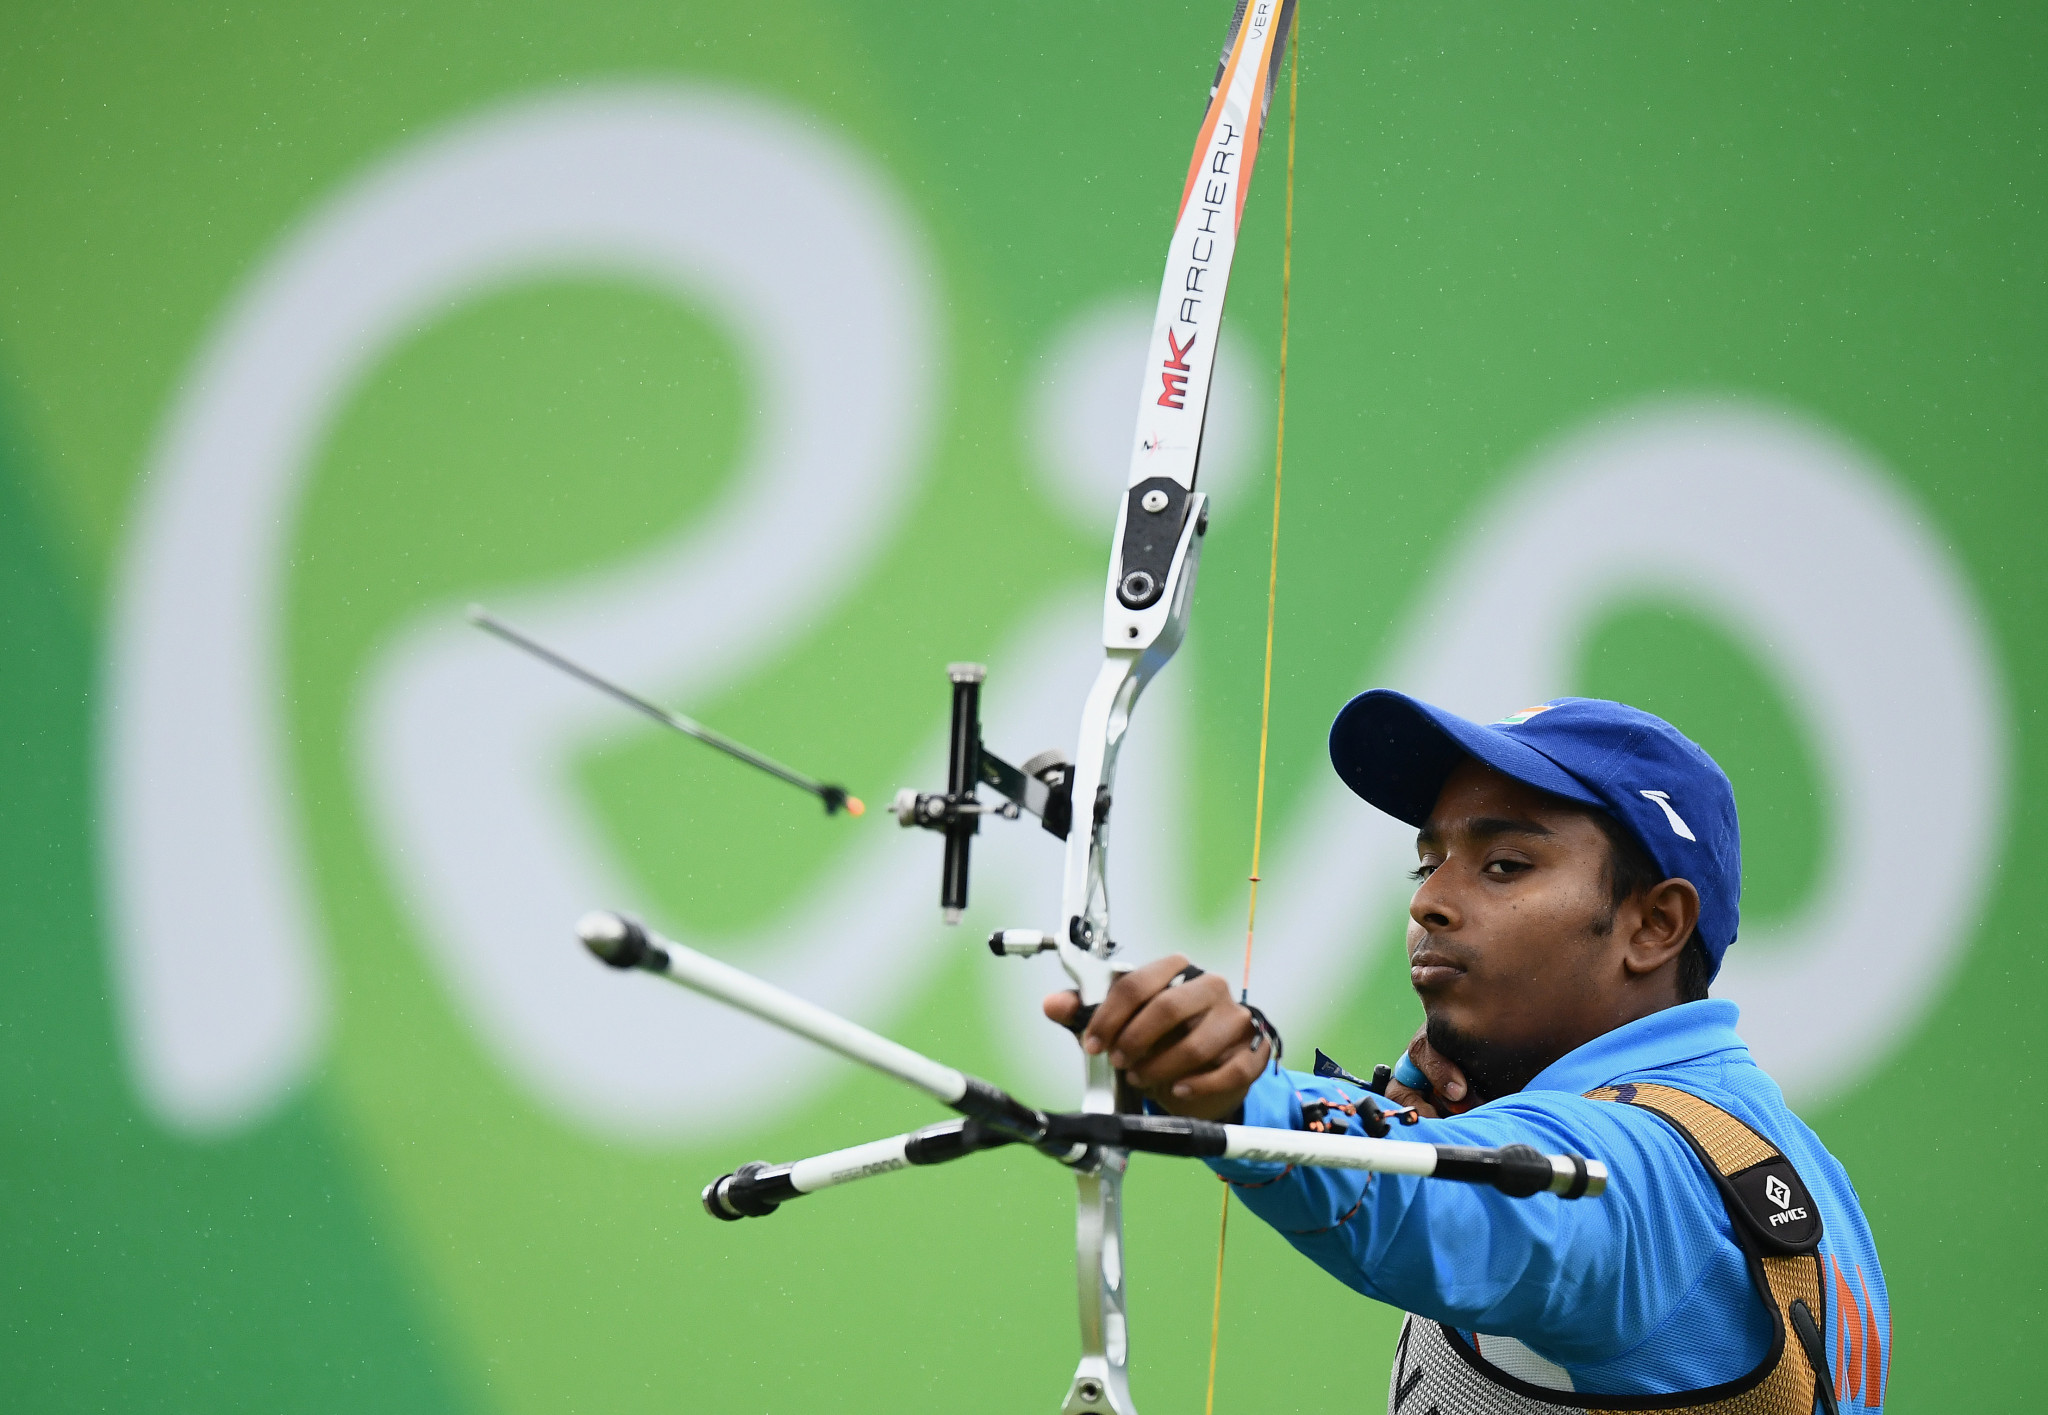 Indian archers had been forced to compete as neutrals following the suspension imposed by World Archery ©Getty Images